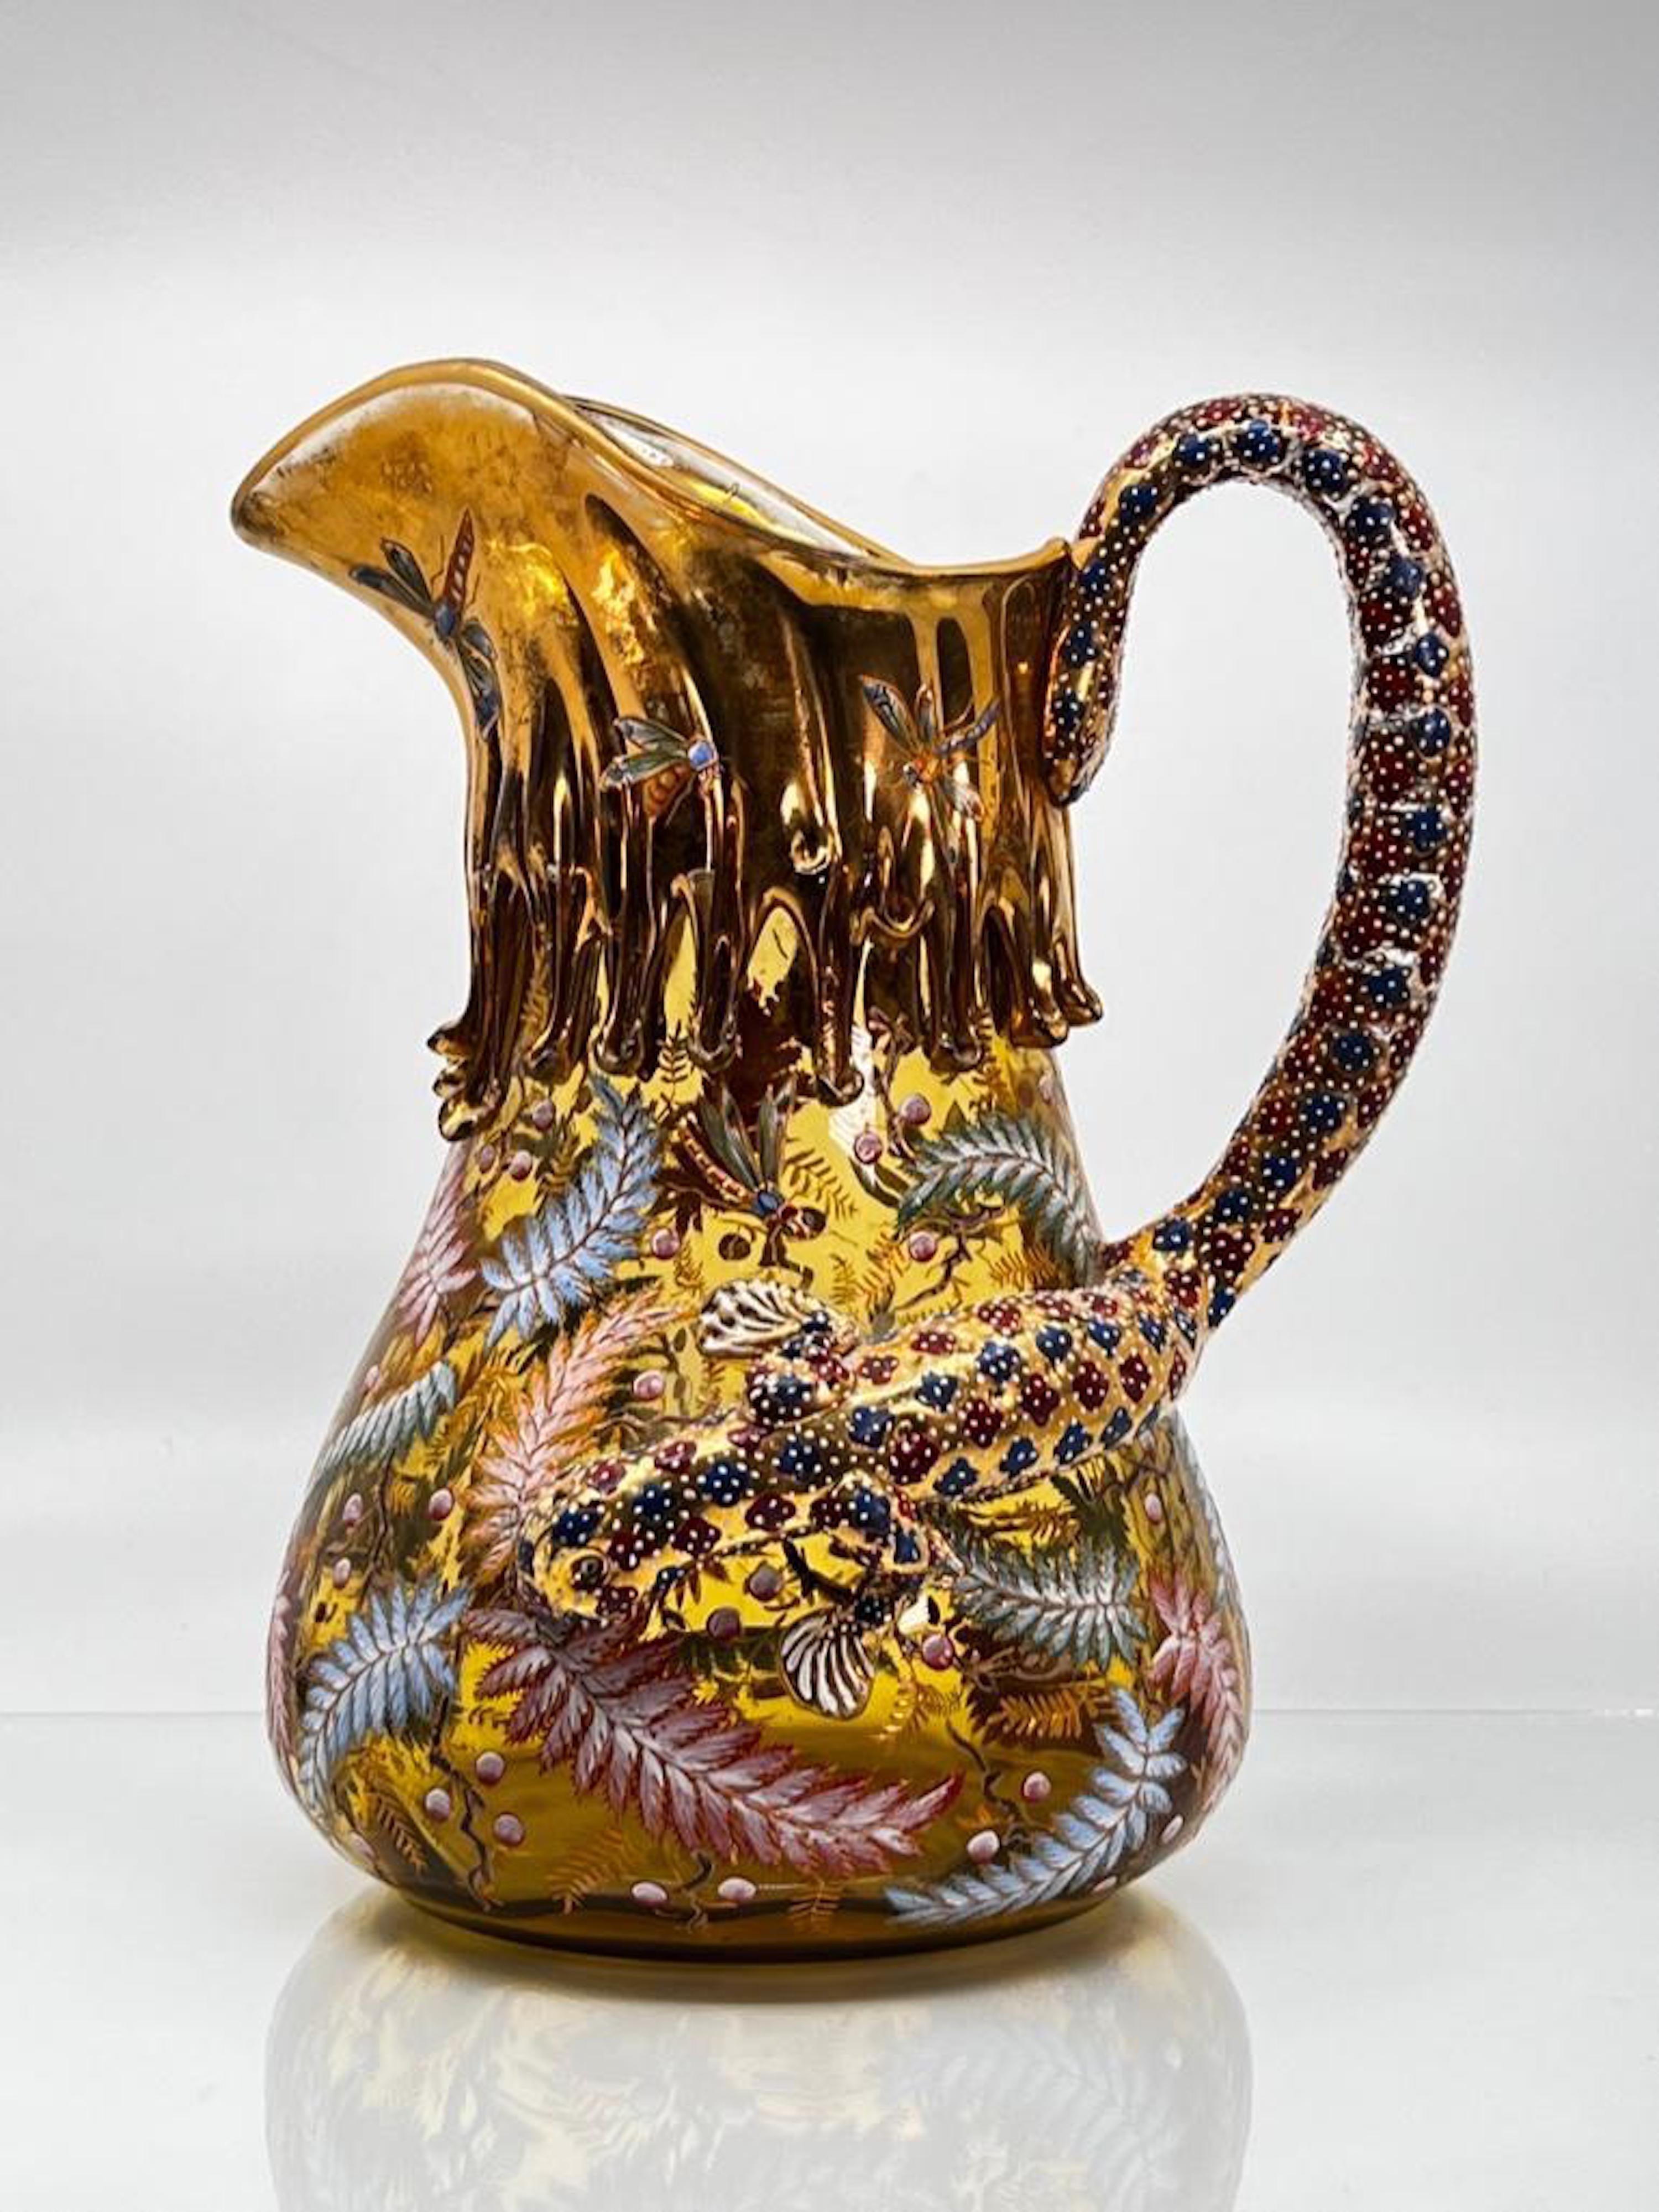 Circa-1890 Moser gilded and enameled pitcher with an applied scroll handle in the form of a salamander or lizard, est. $800-$1,200